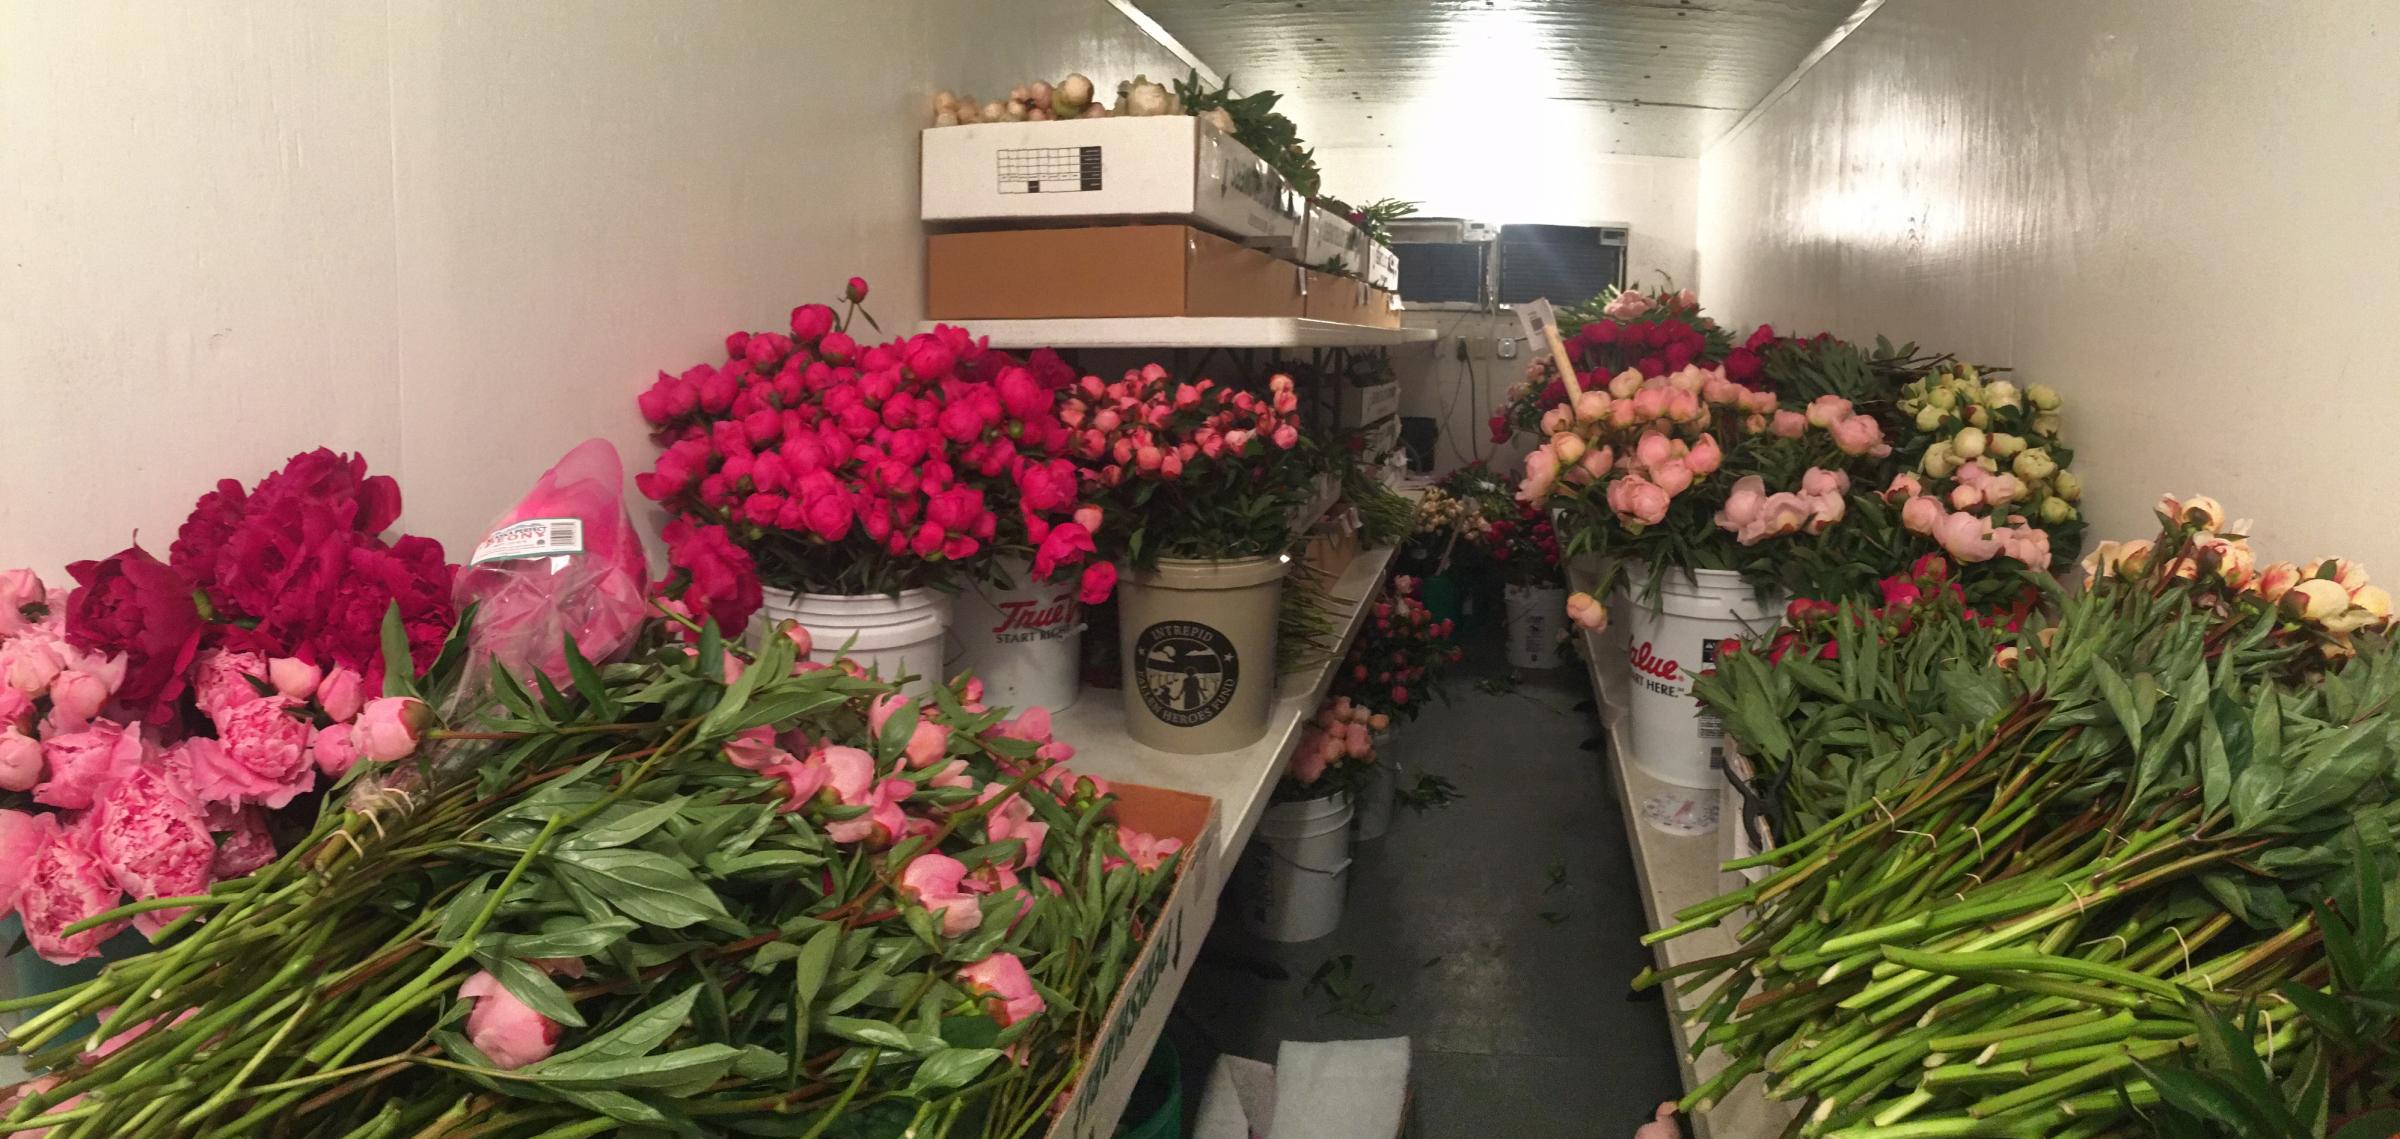 Peonies need to be kept in coolers just above freezing in order to keep the buds closed for shipping. (Photo by Casey Marsh, KBBI - Homer)